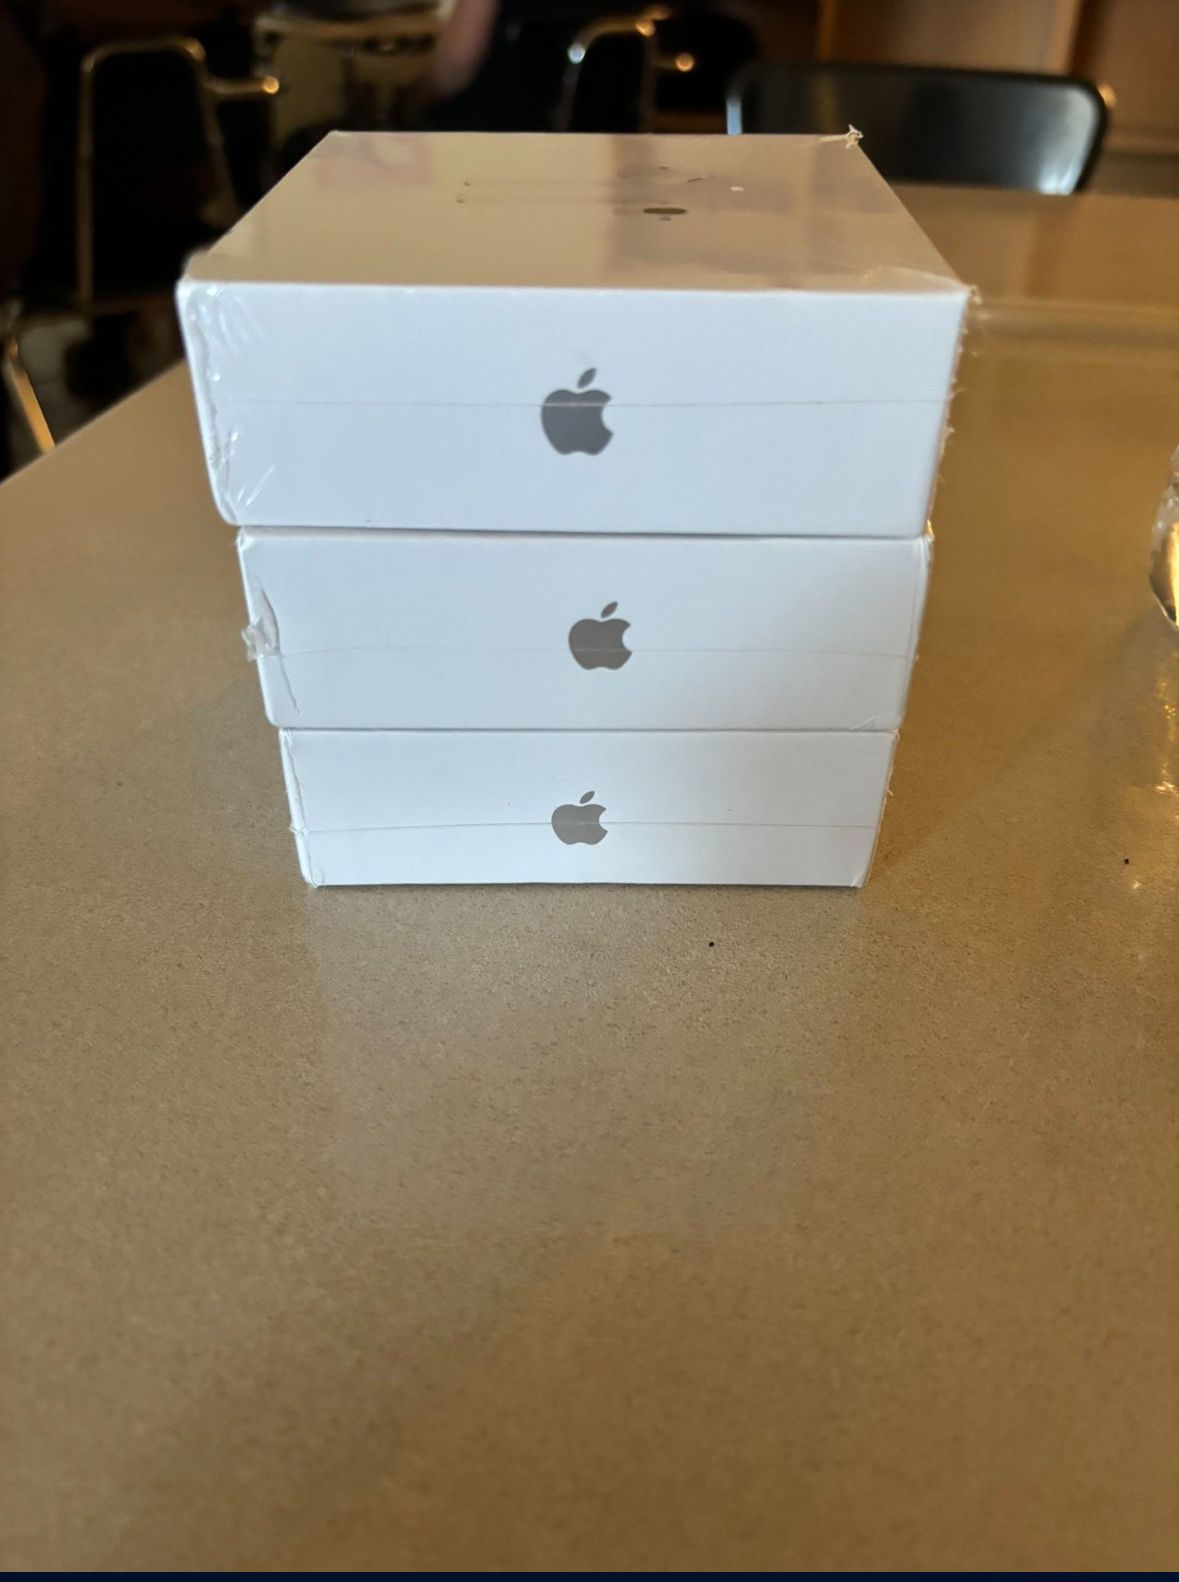 AirPod Pros (BRAND NEW) Still Wrapped In Box 